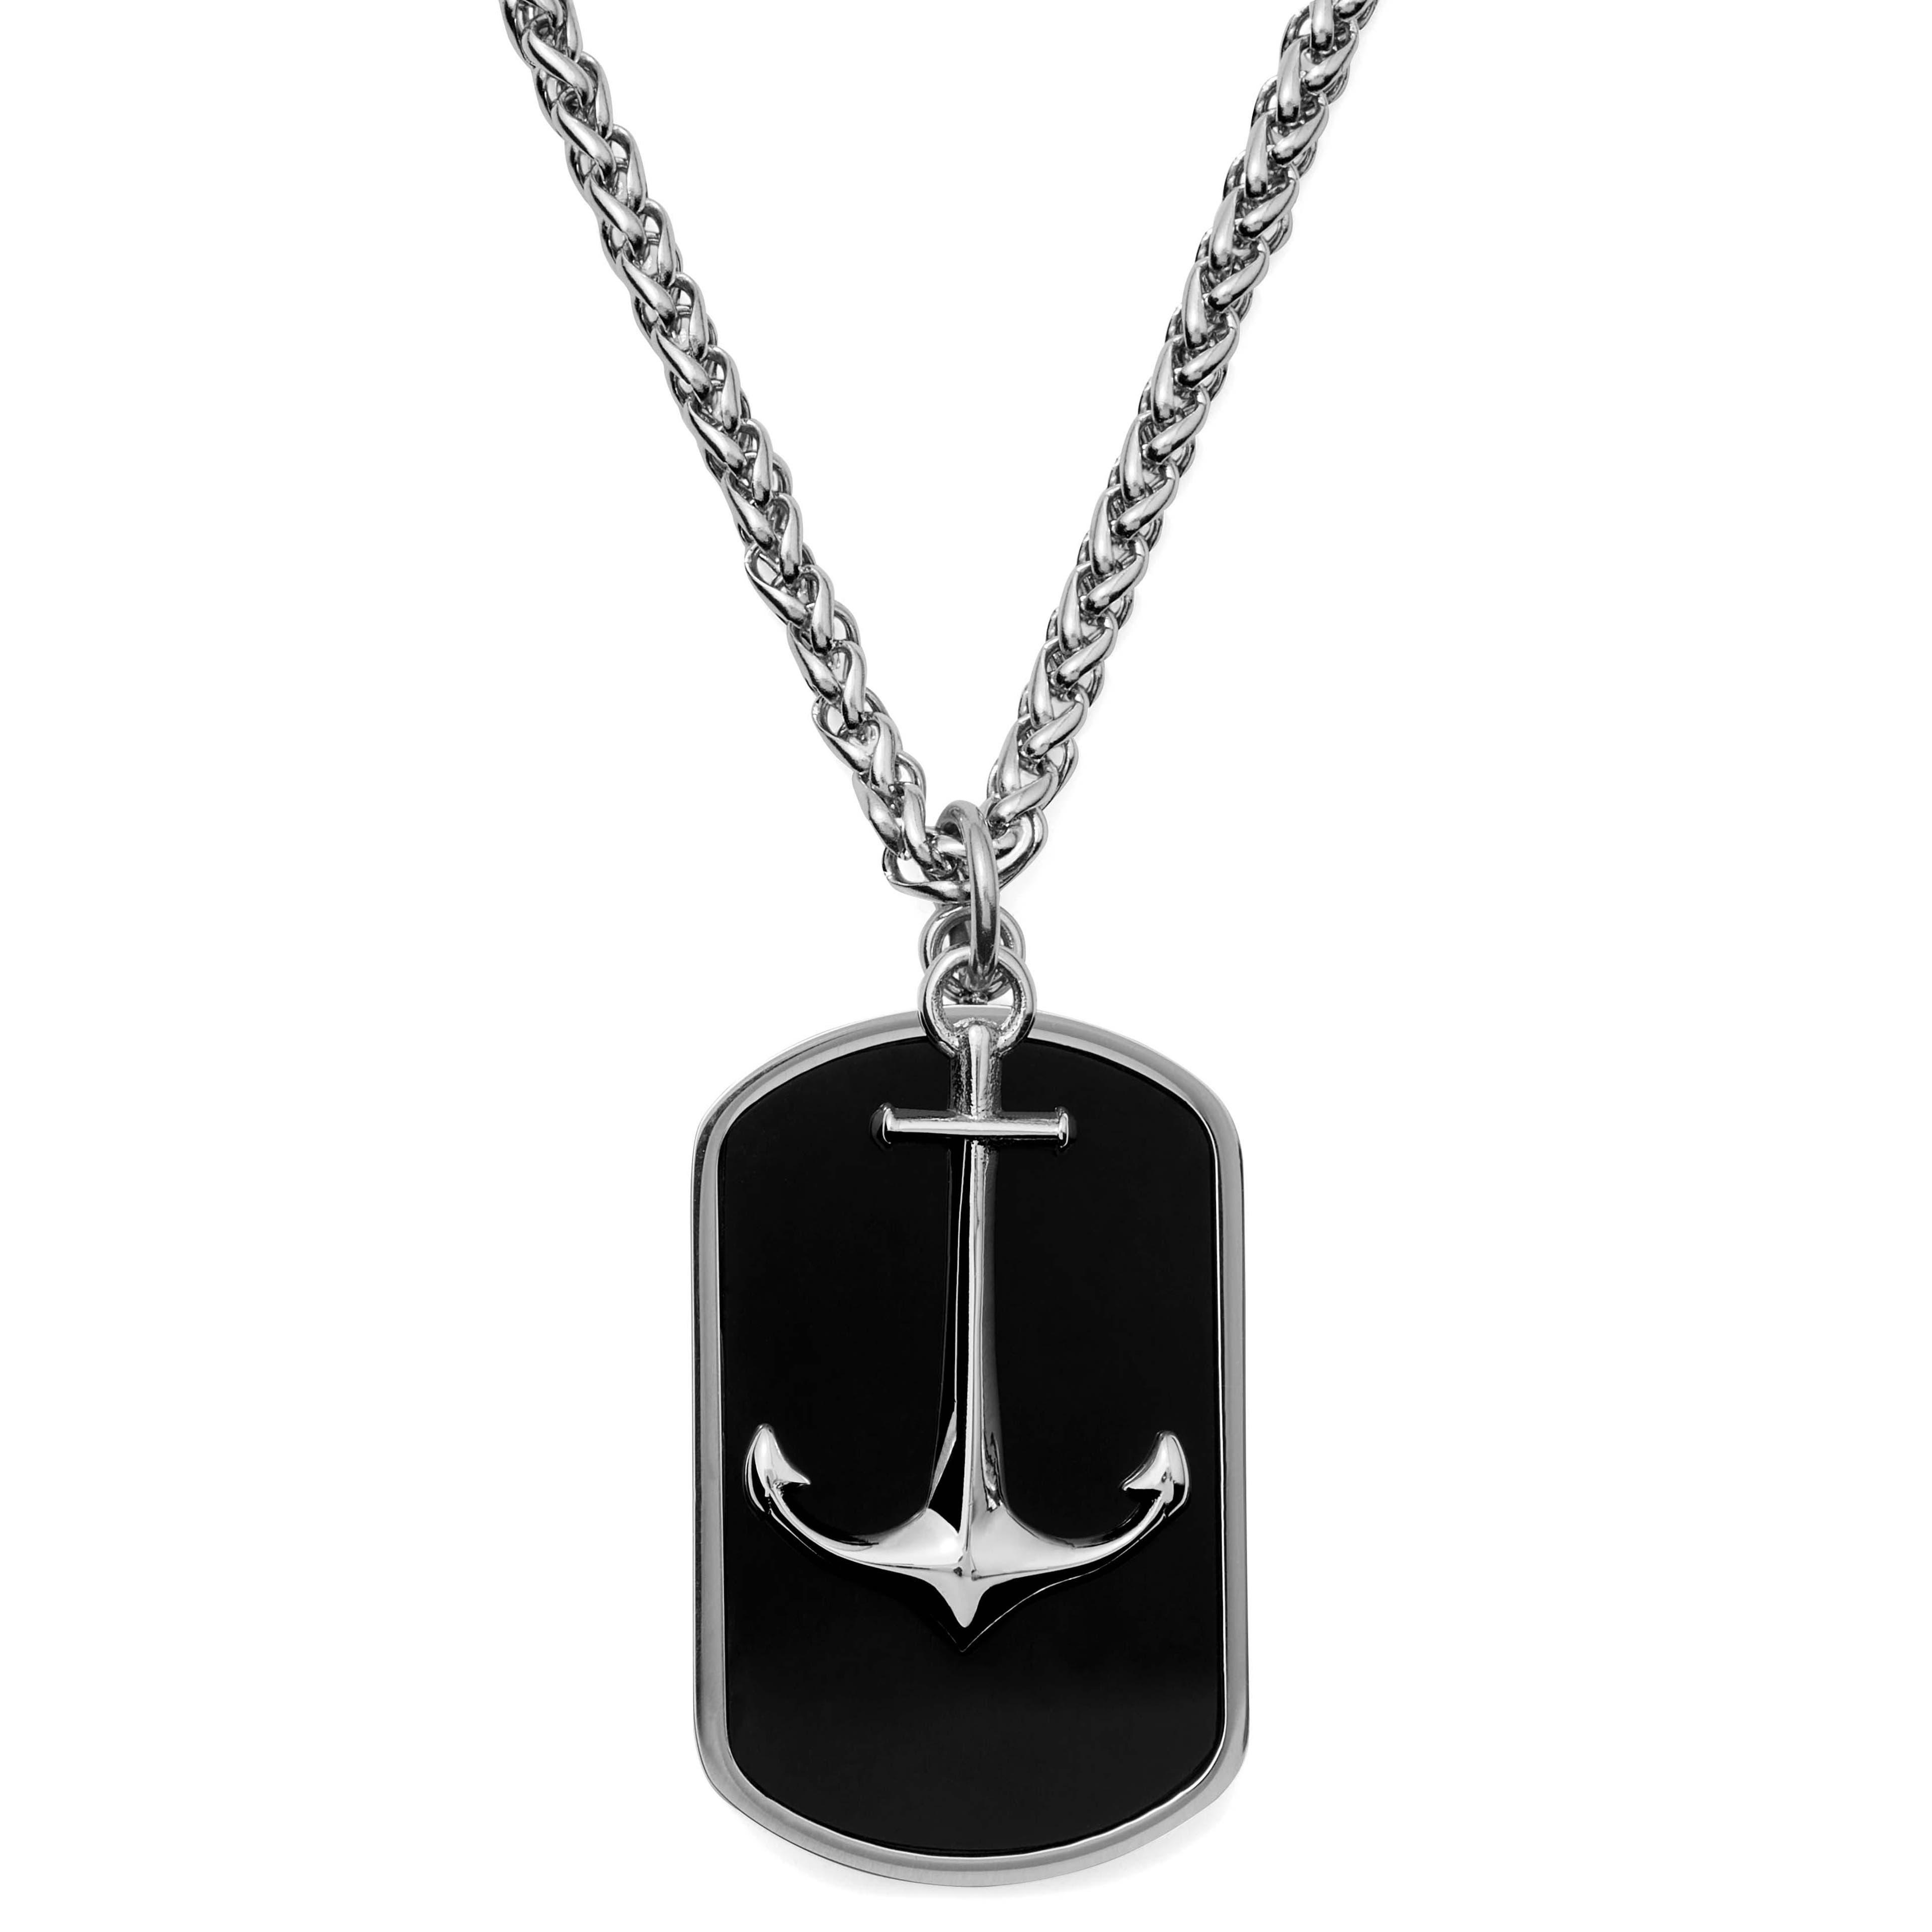 Silver-Tone Stainless Steel Anchor & Black Onyx Dog Tag Wheat Chain Necklace